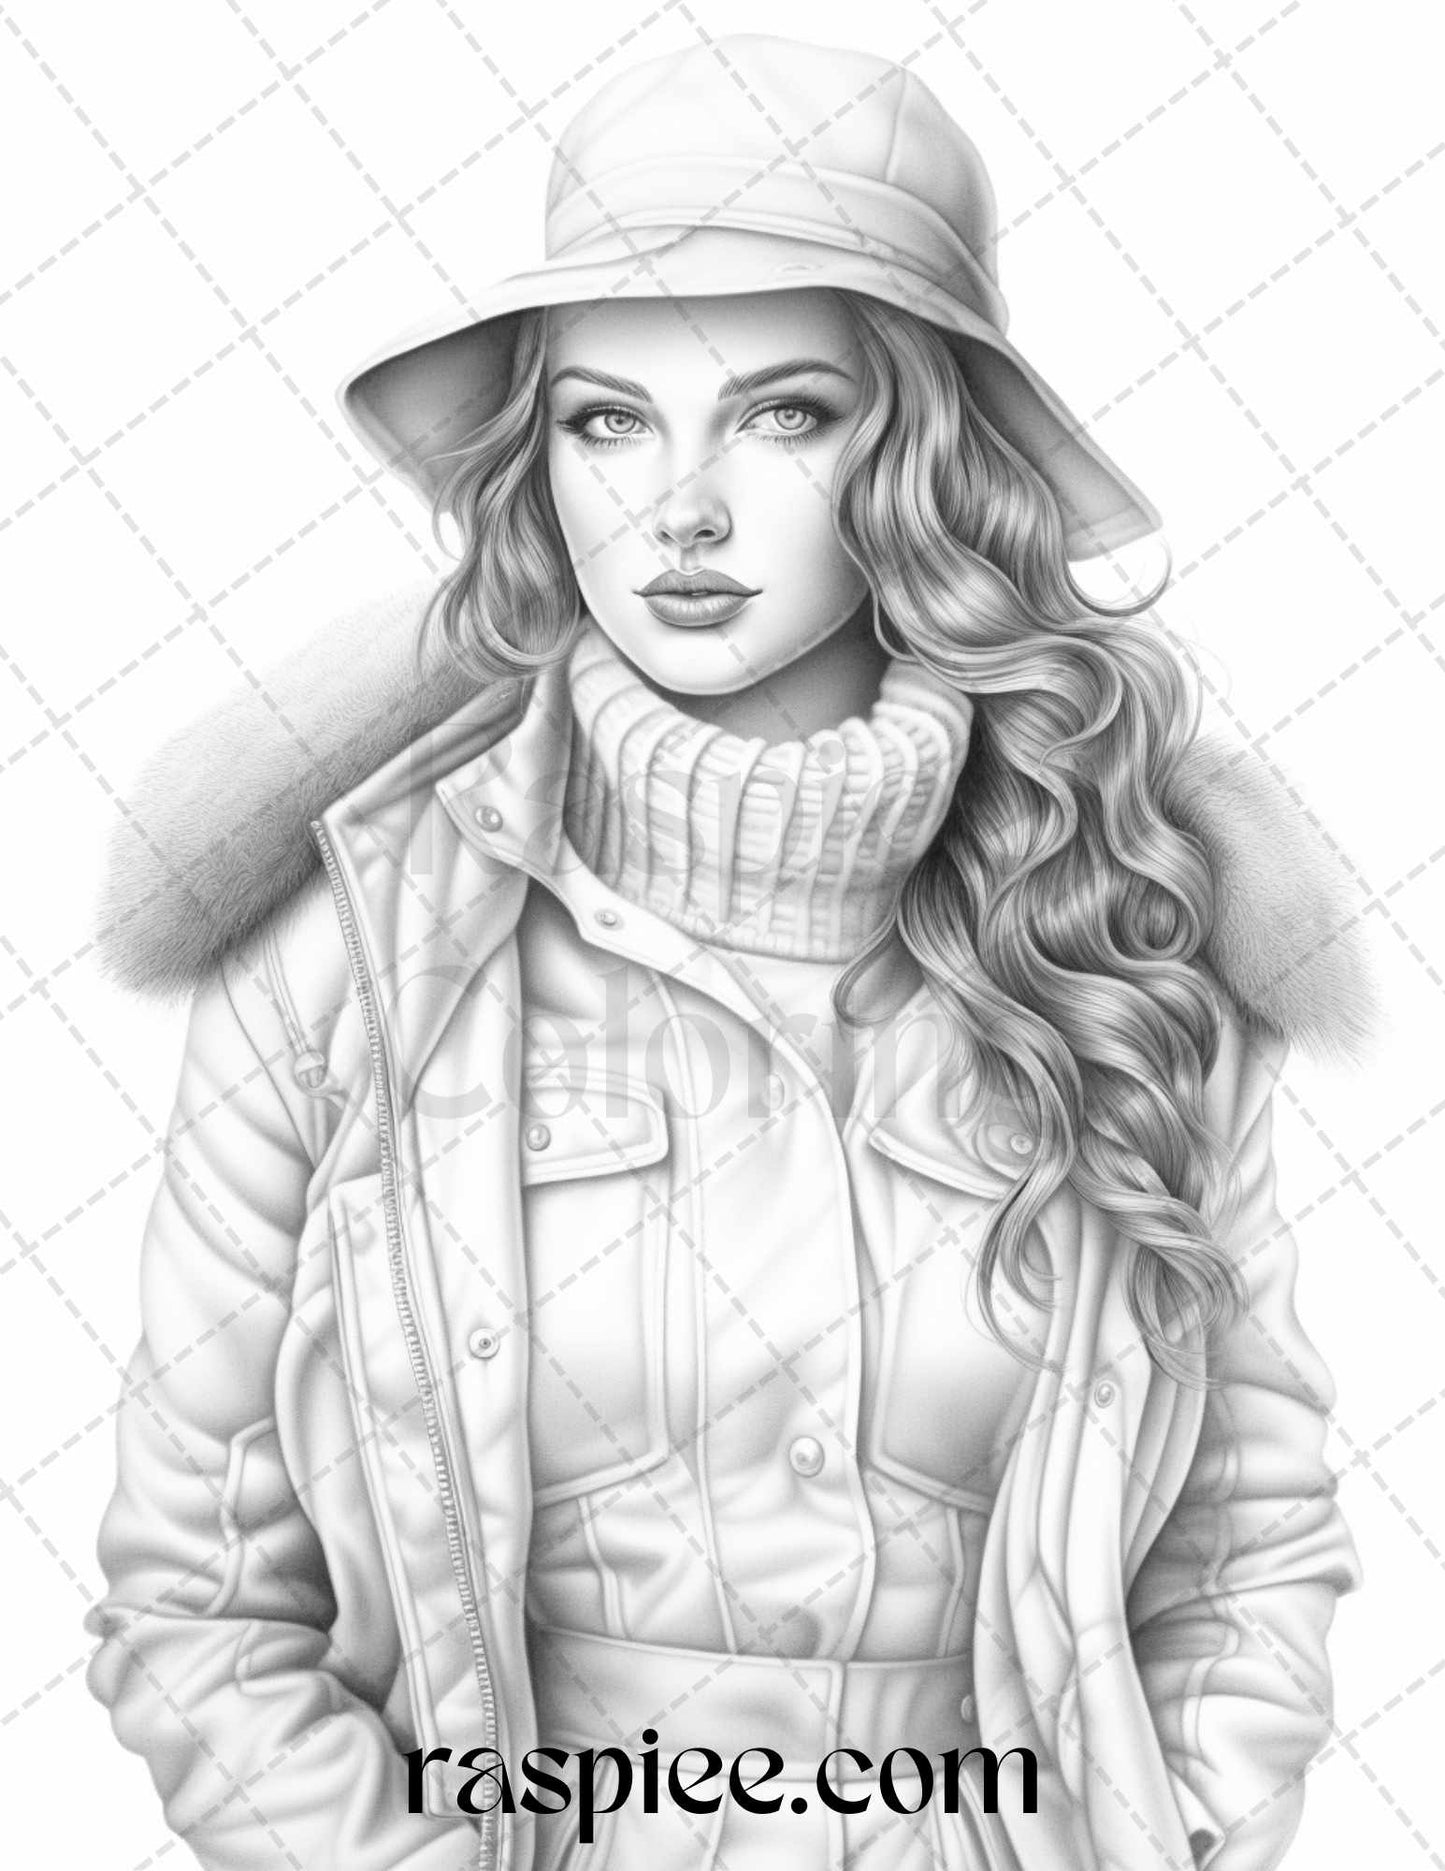 Winter Fashion Coloring Page, Adult Coloring Book Illustration, Holiday Stress Relief Coloring, DIY Coloring Activity, Creative Coloring Page, High-Quality Coloring Printable, Fashionable Coloring Sheet